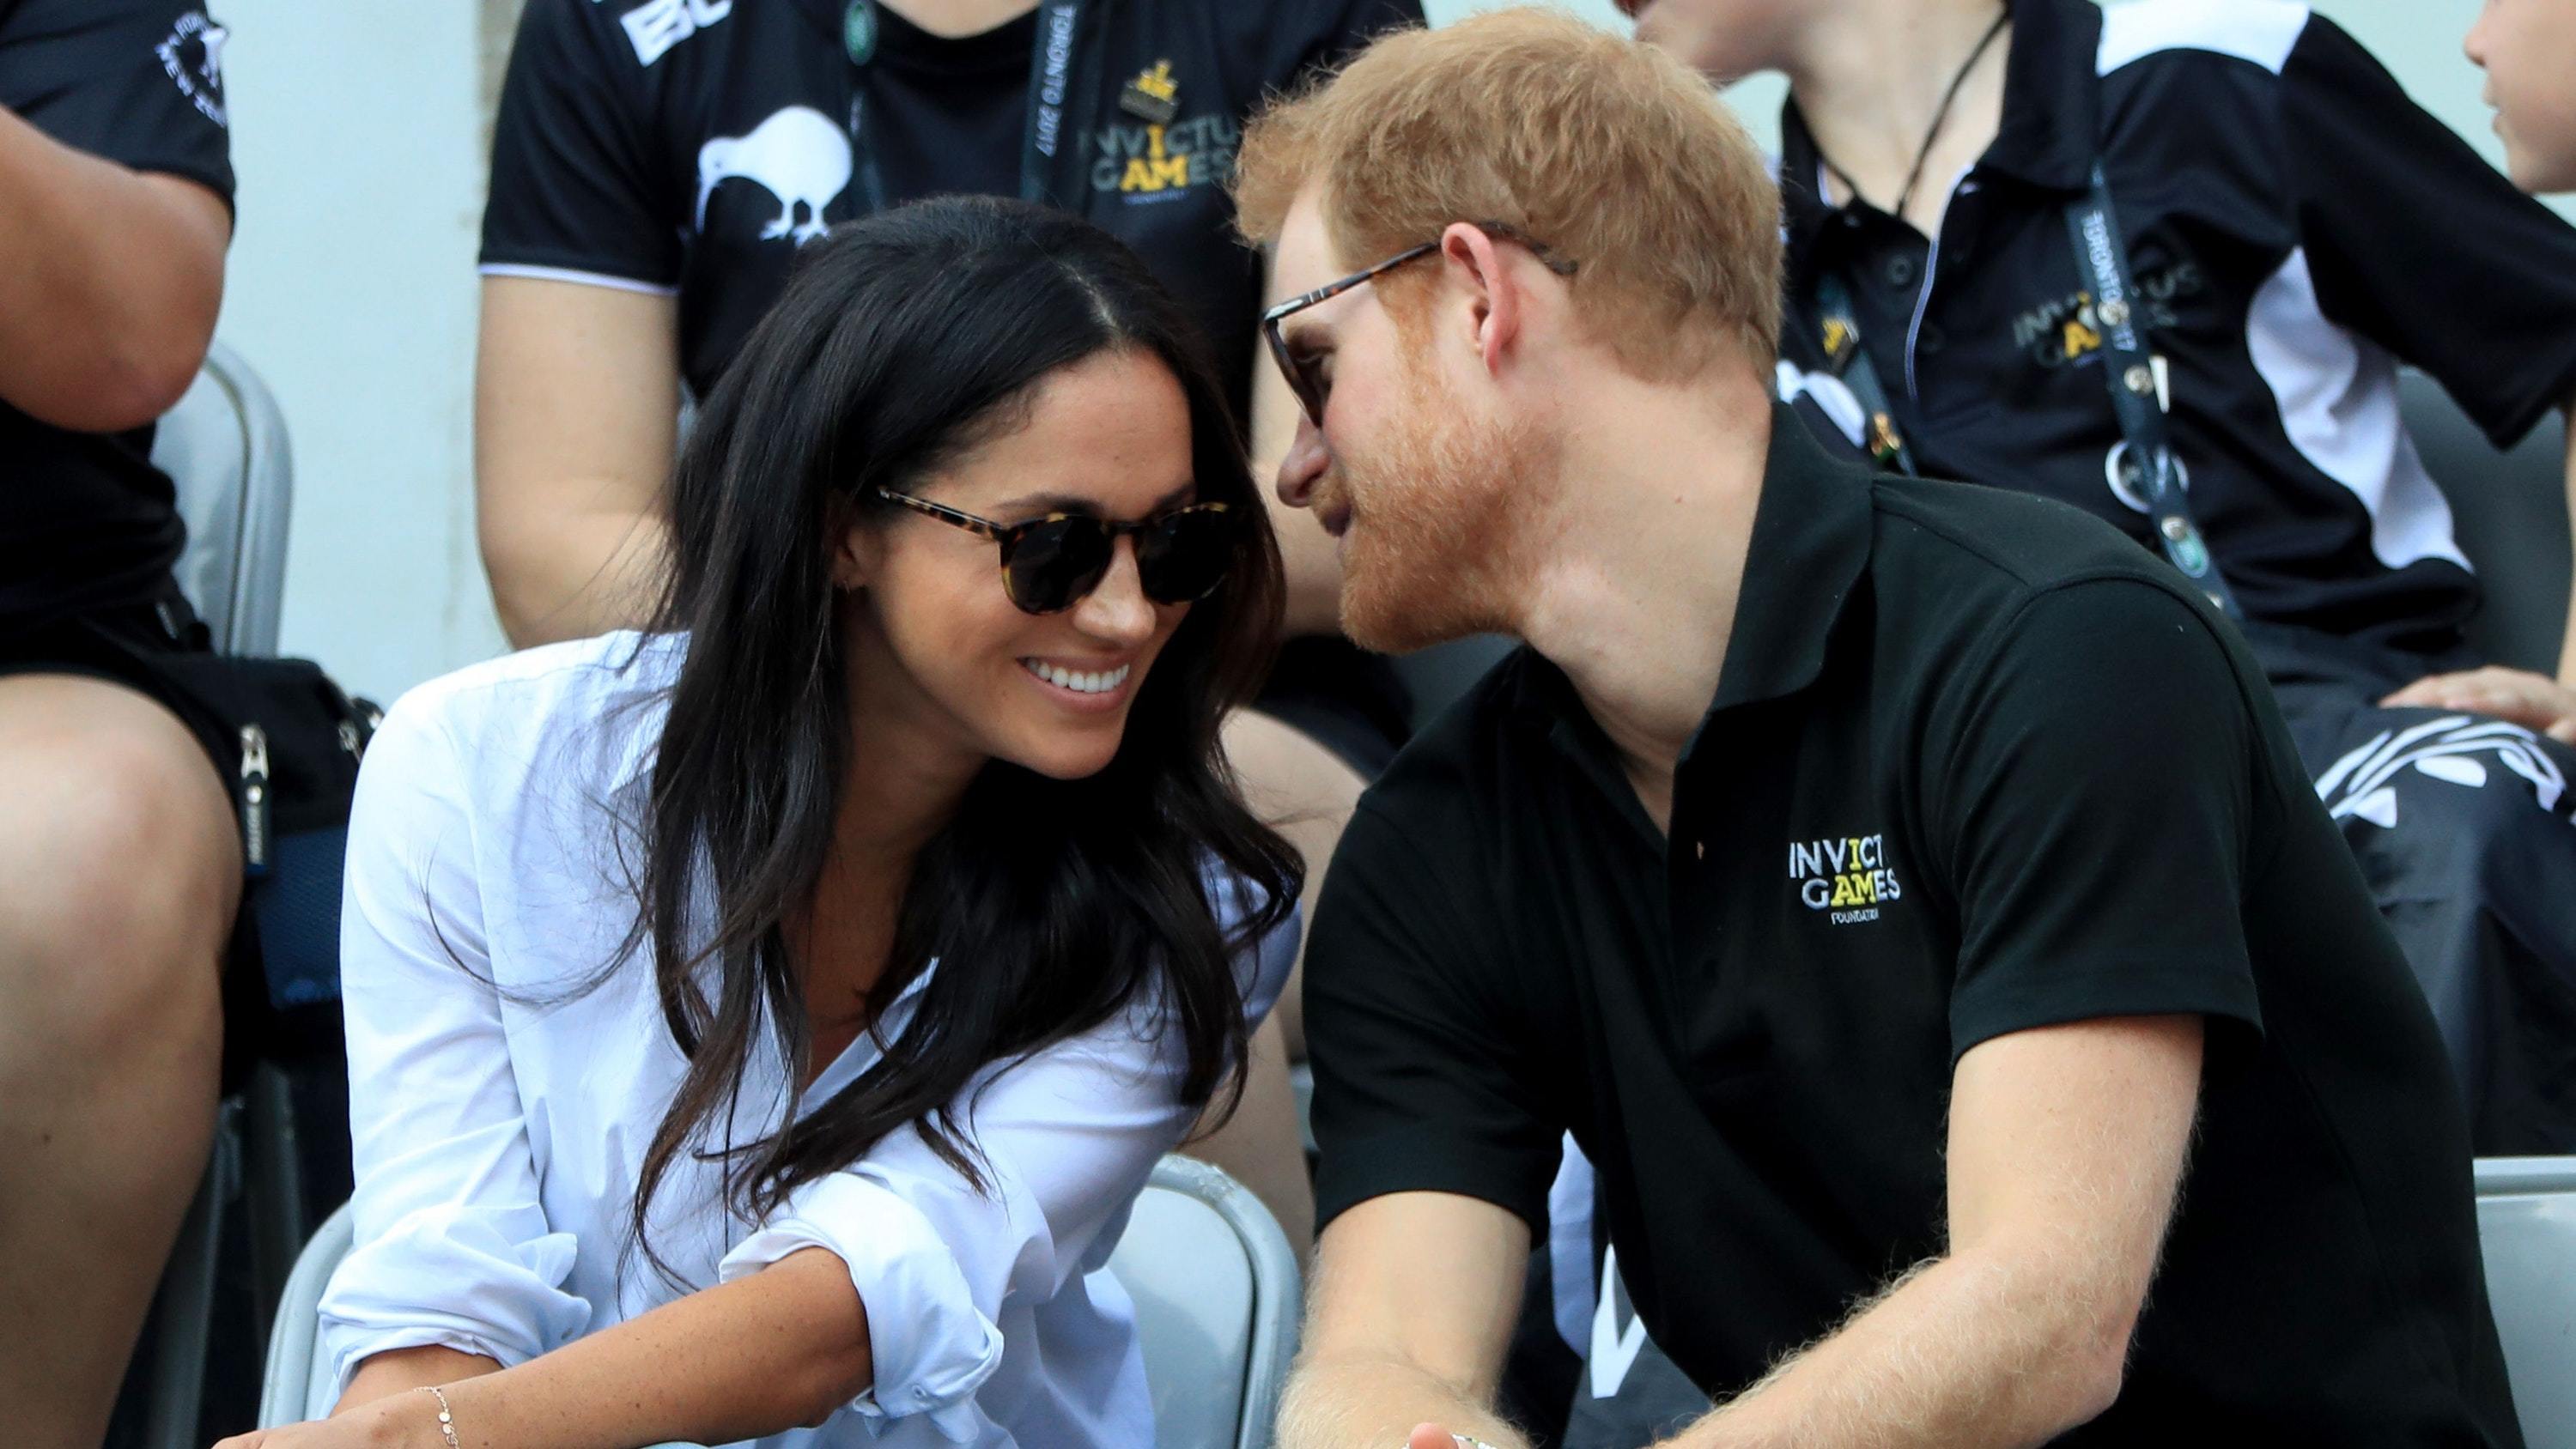 Prince Harry with girlfriend Meghan Markle at the Invictus Games in Toronto (Danny Lawson/PA)